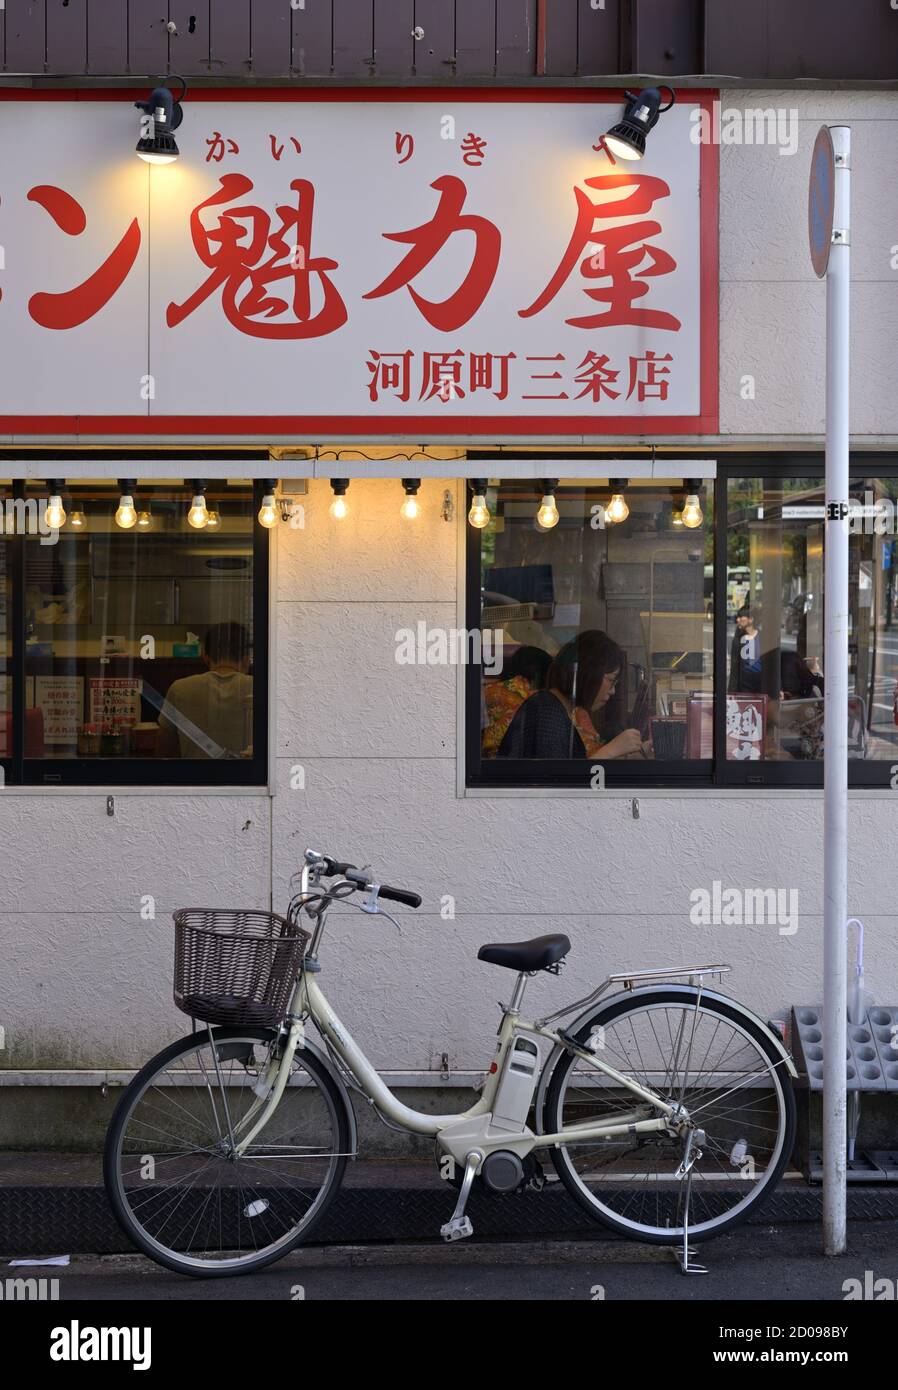 A traditional Ramen eatery in Ebisucho, Kyoto JP Stock Photo